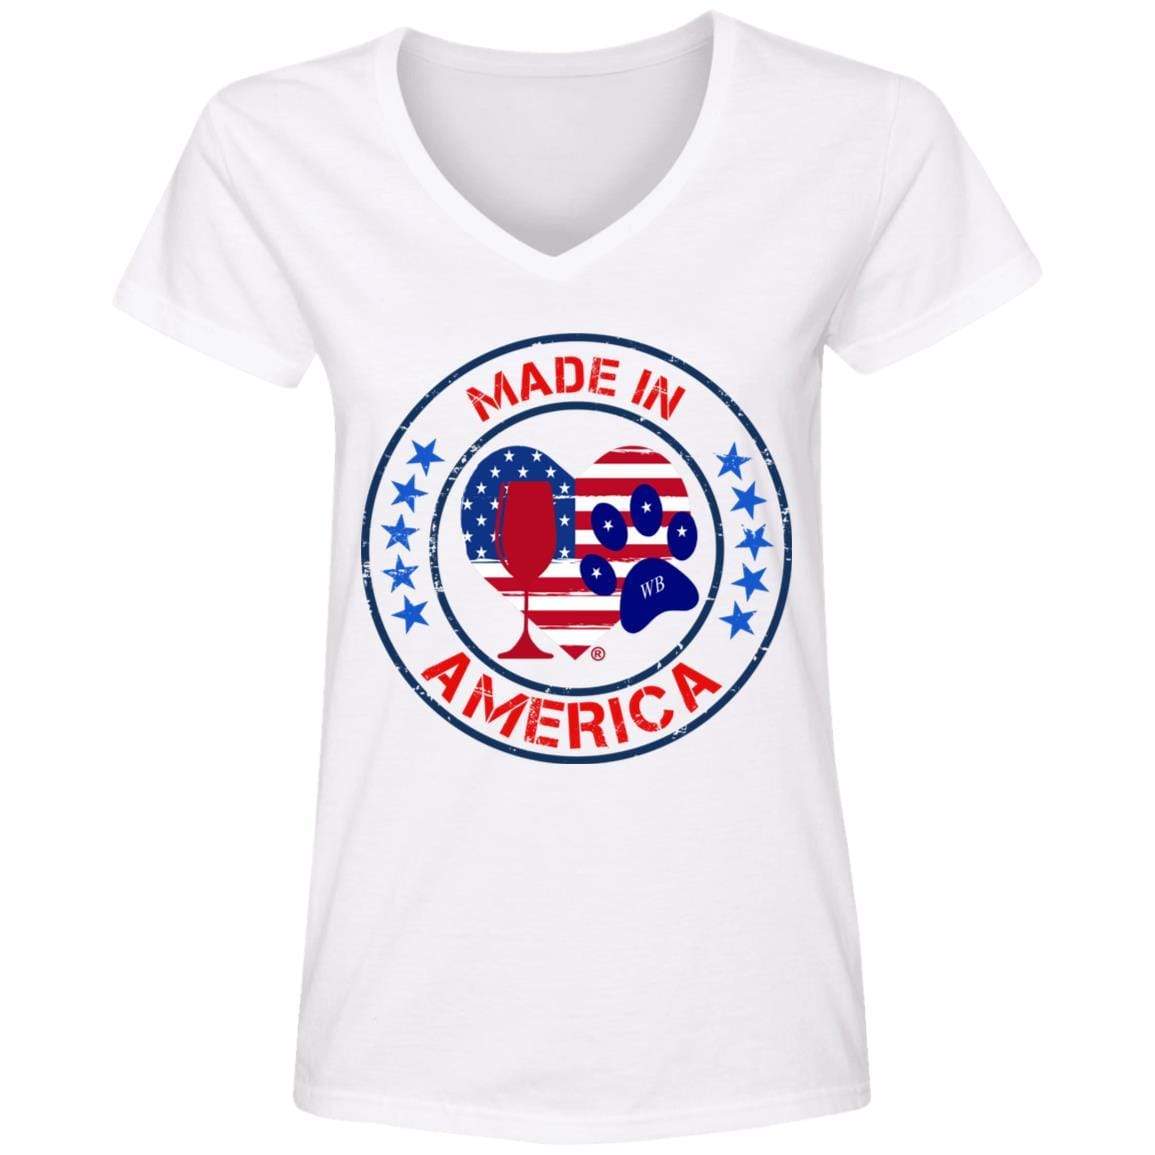 T-Shirts White / S Winey Bitches Co "Made In America" Ladies' V-Neck T-Shirt WineyBitchesCo